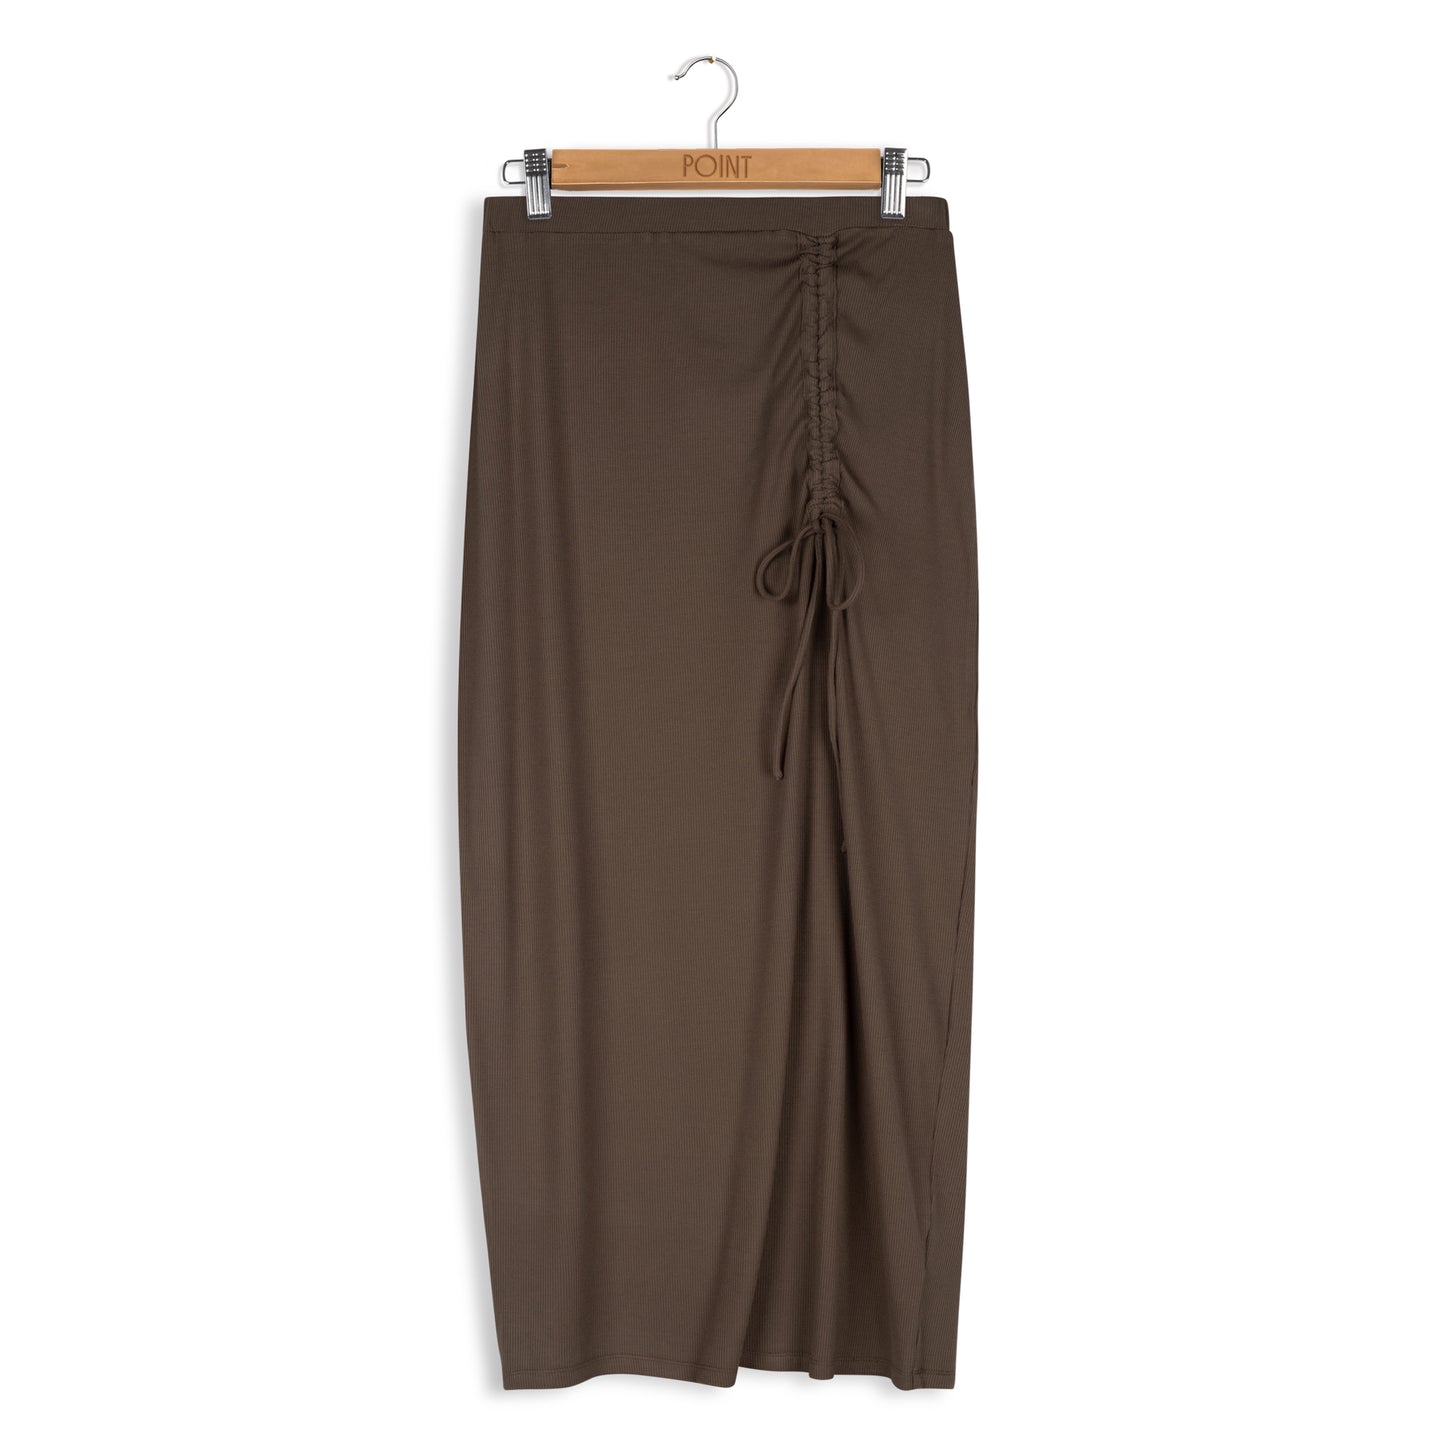 point ruched skirt